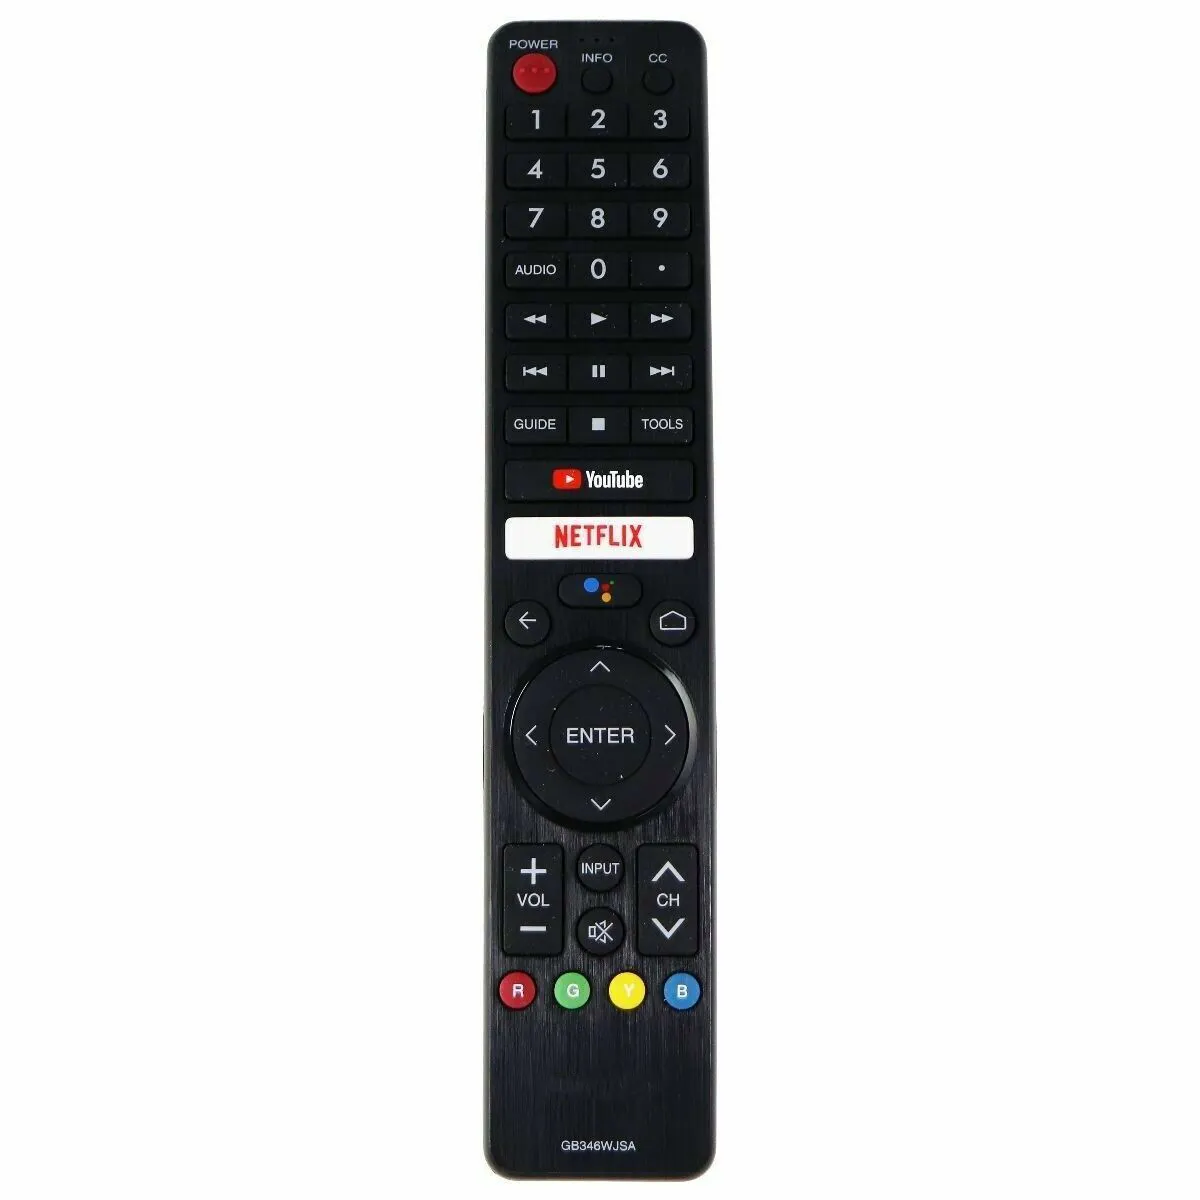 In Stock GB346WJSA Replacement Voice Remote Control for Sharp Android TV 4K Smart LED Television GB346WJSA GB326WJSA SHWRMC0116